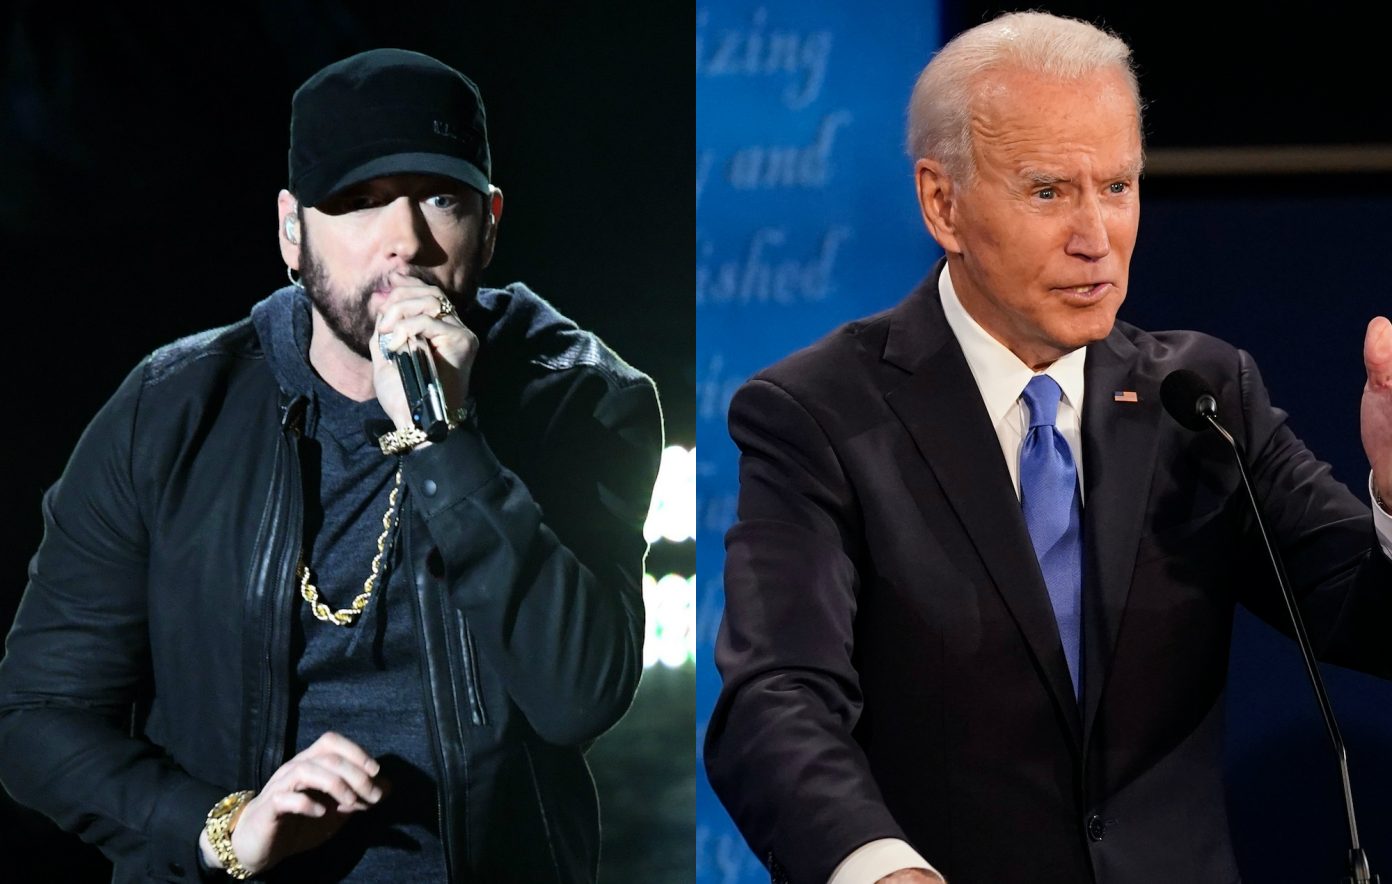 Eminem Licenses 'Lose Yourself' For First Time For Joe Biden Campaign Ad